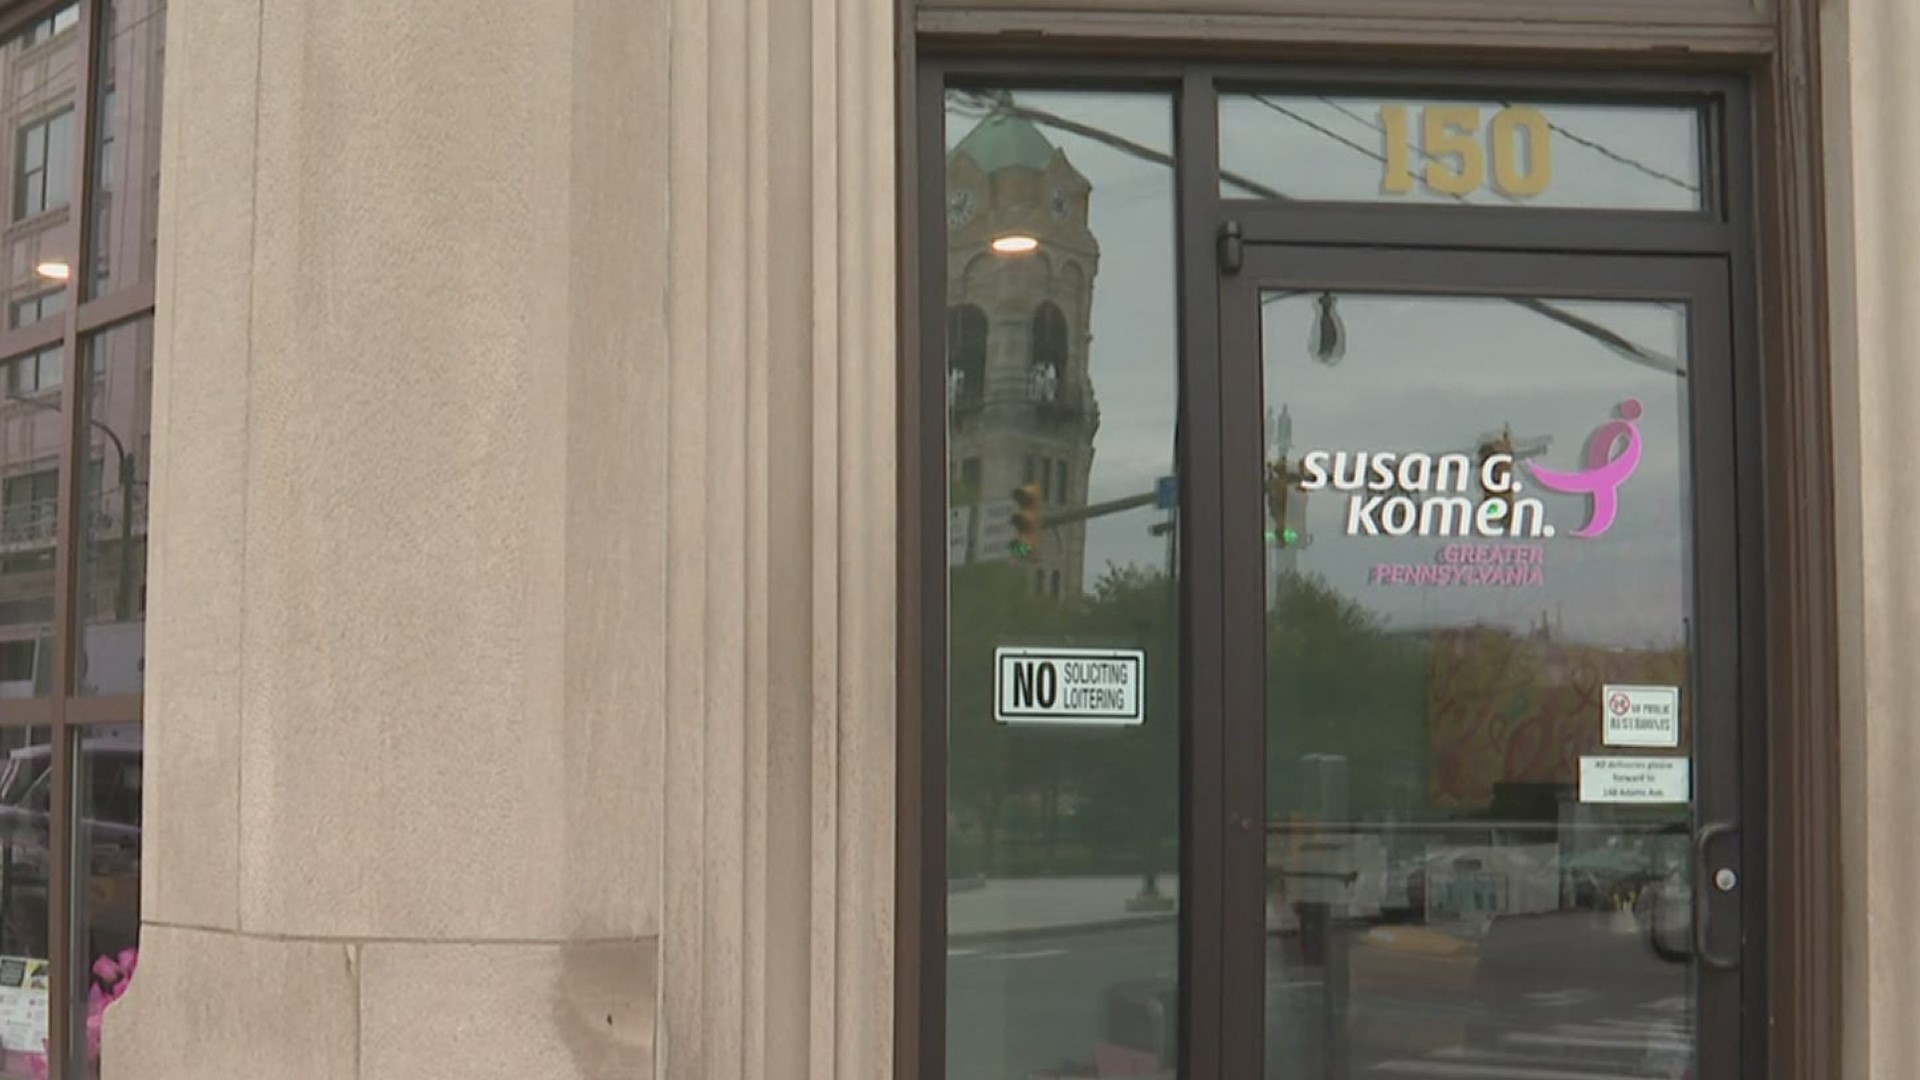 The Susan G. Komen Foundation, the sponsor of the "Race for the Cure", will close all of its local chapters, including the office in Scranton.